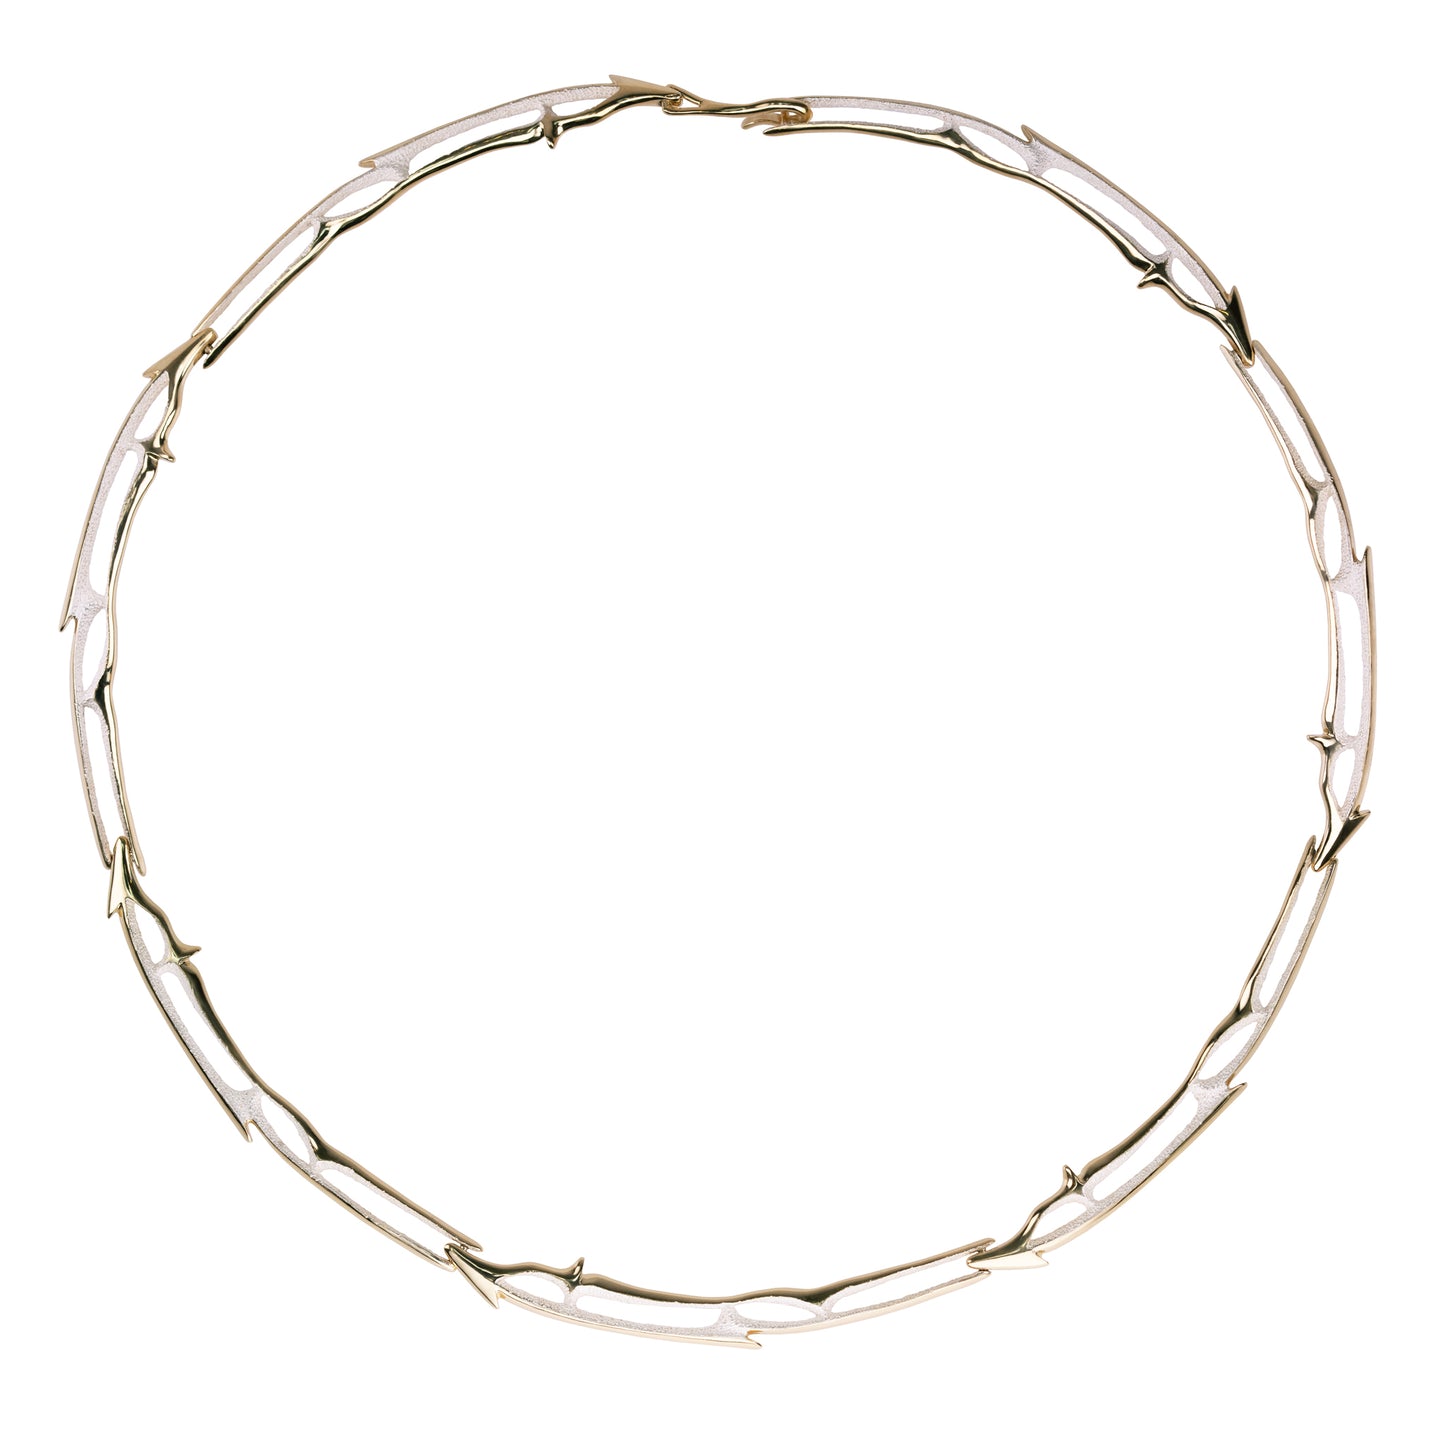 Orme-Brown Contemporary Fine Jewellery Ethical Luxury Arrow link necklace in sustainable recycled silver and gold